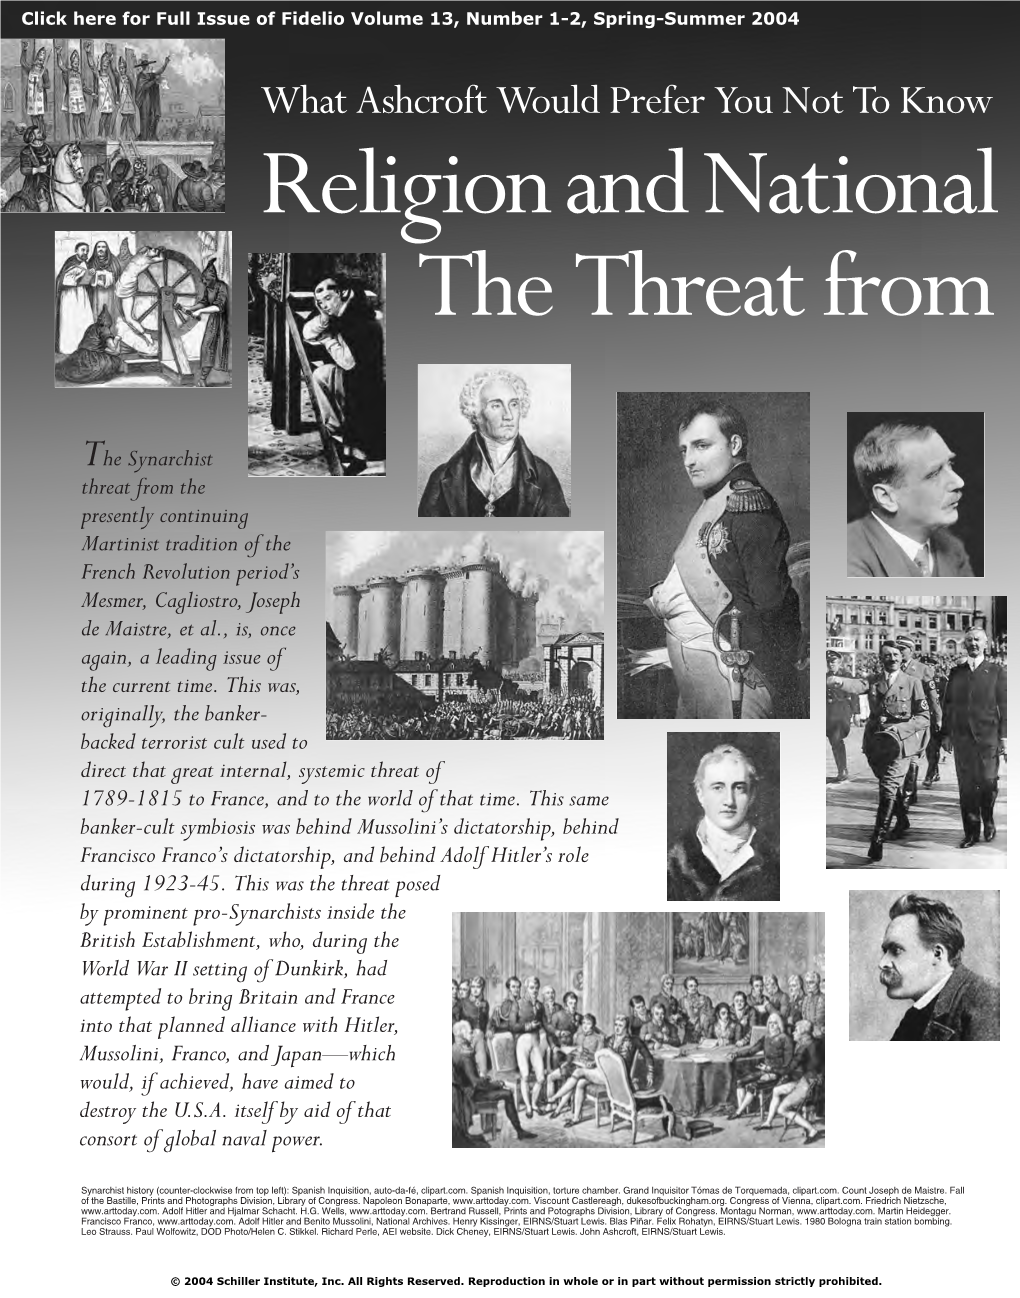 Religion and National Security: the Threat from Terrorist Cults